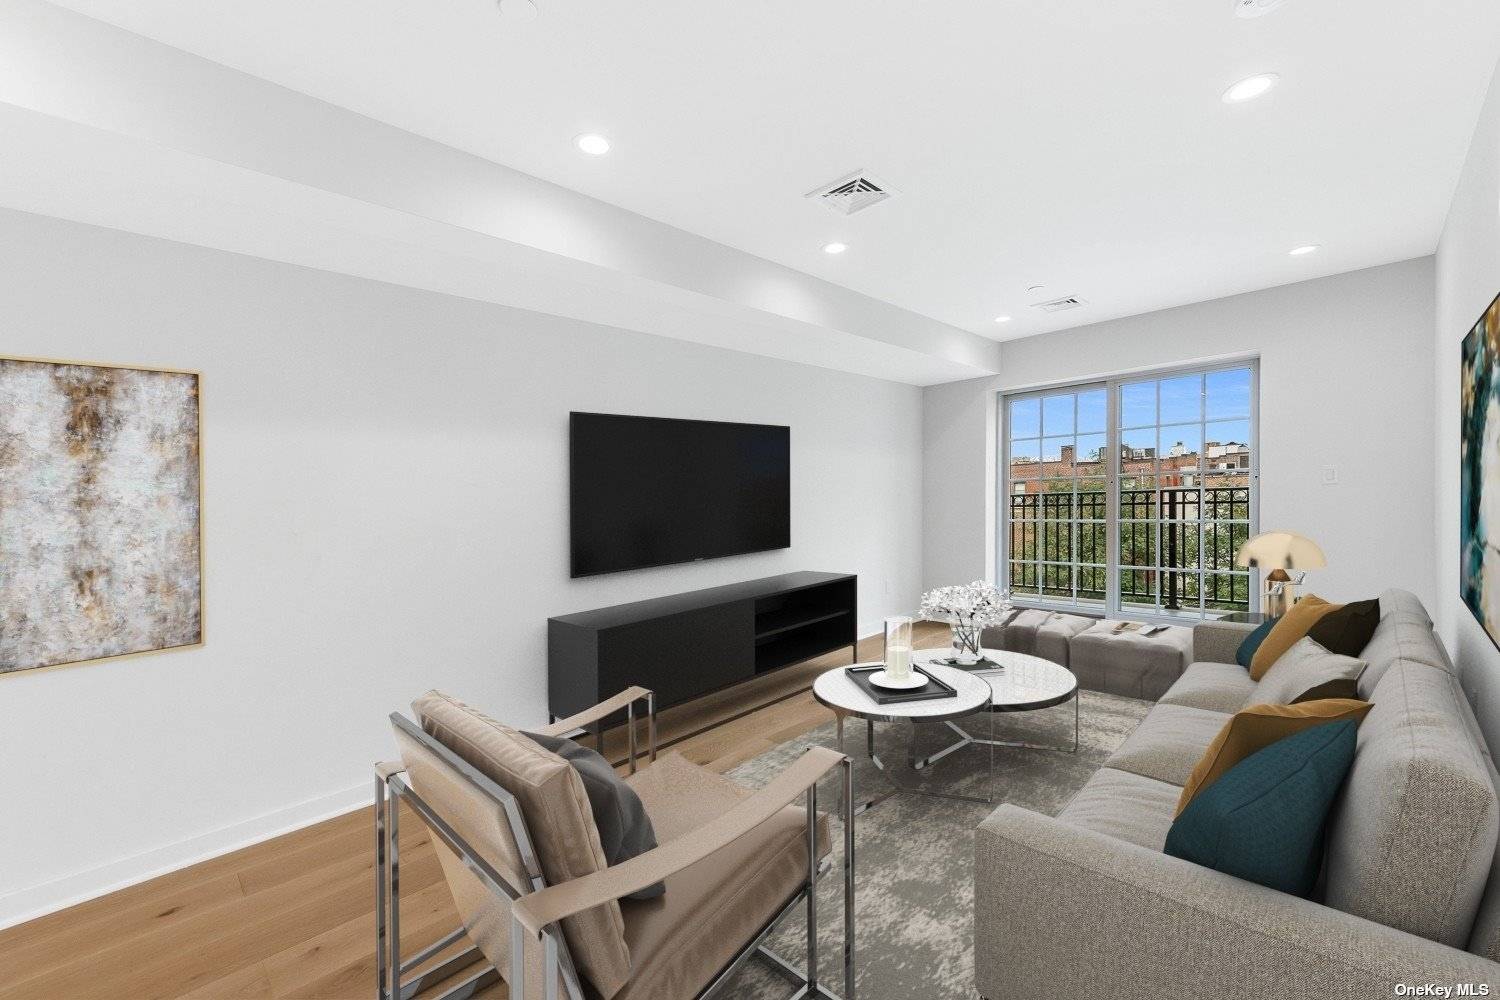 Residence 2B 2 Bedroom 1 Bath 948 SF Introducing the All New 23 23 30 Road Astoria Residences.